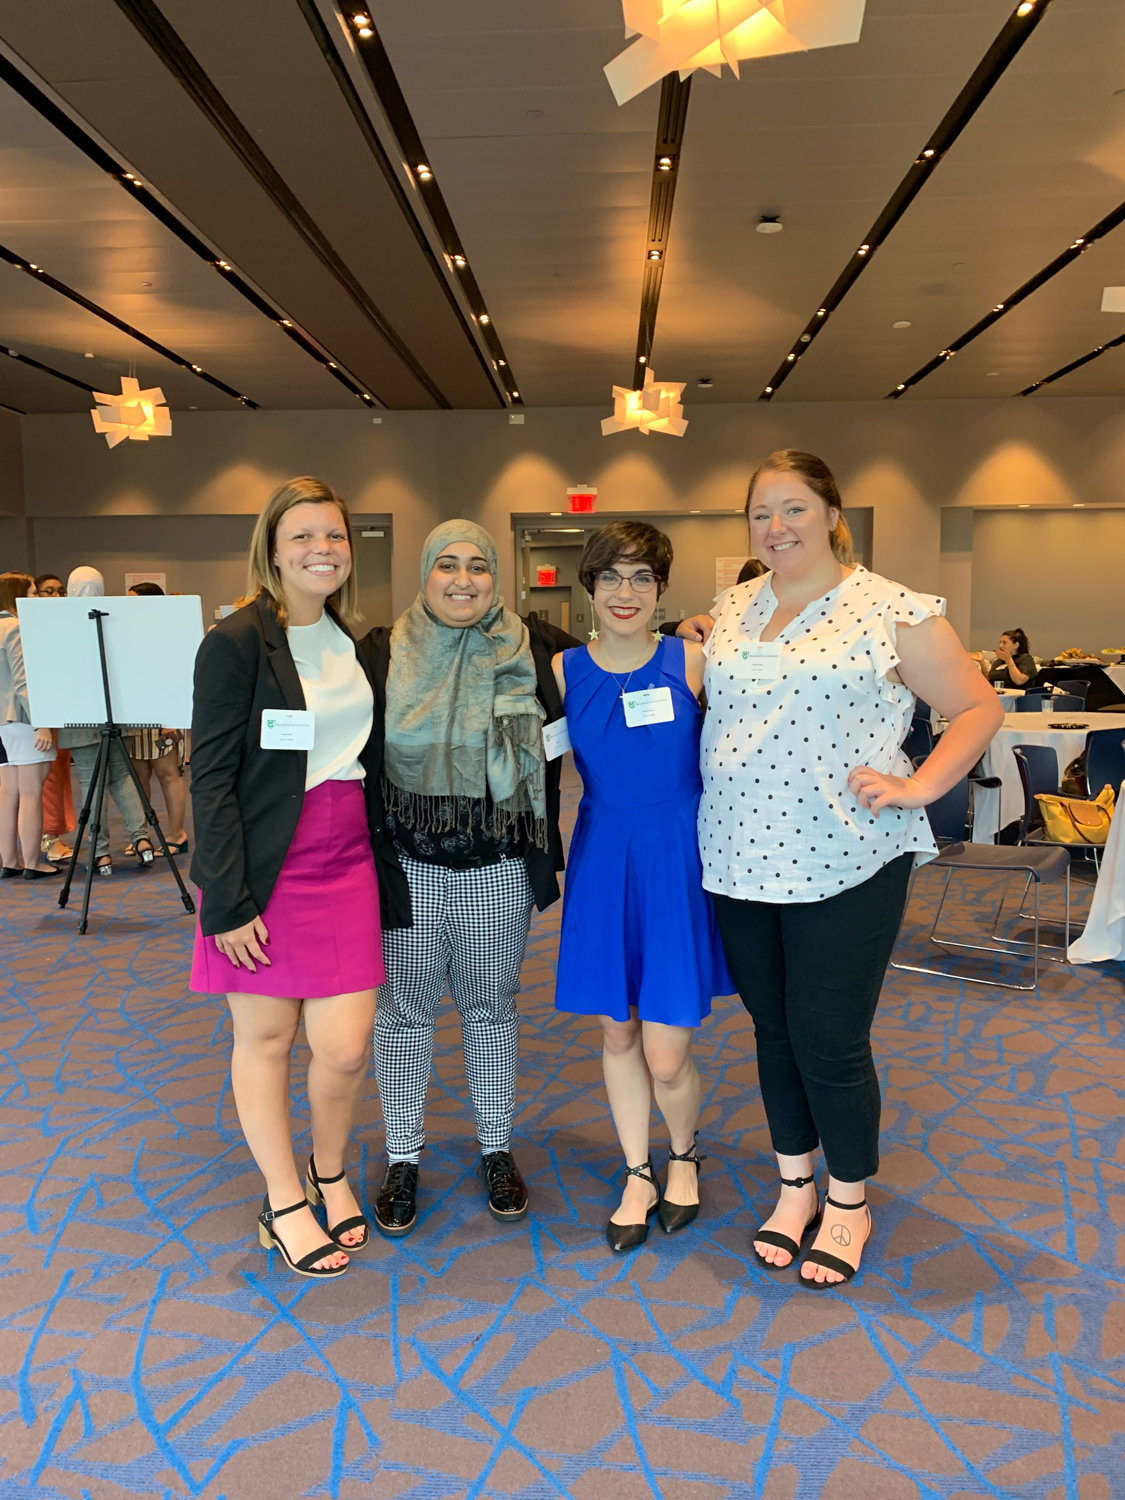 Rose Brennan, center right, participated in the Women Inspiring Successful Enterprise program at Manhattan College, along with August Kissel, left, Rabea Ali and Ireland Twiggs.